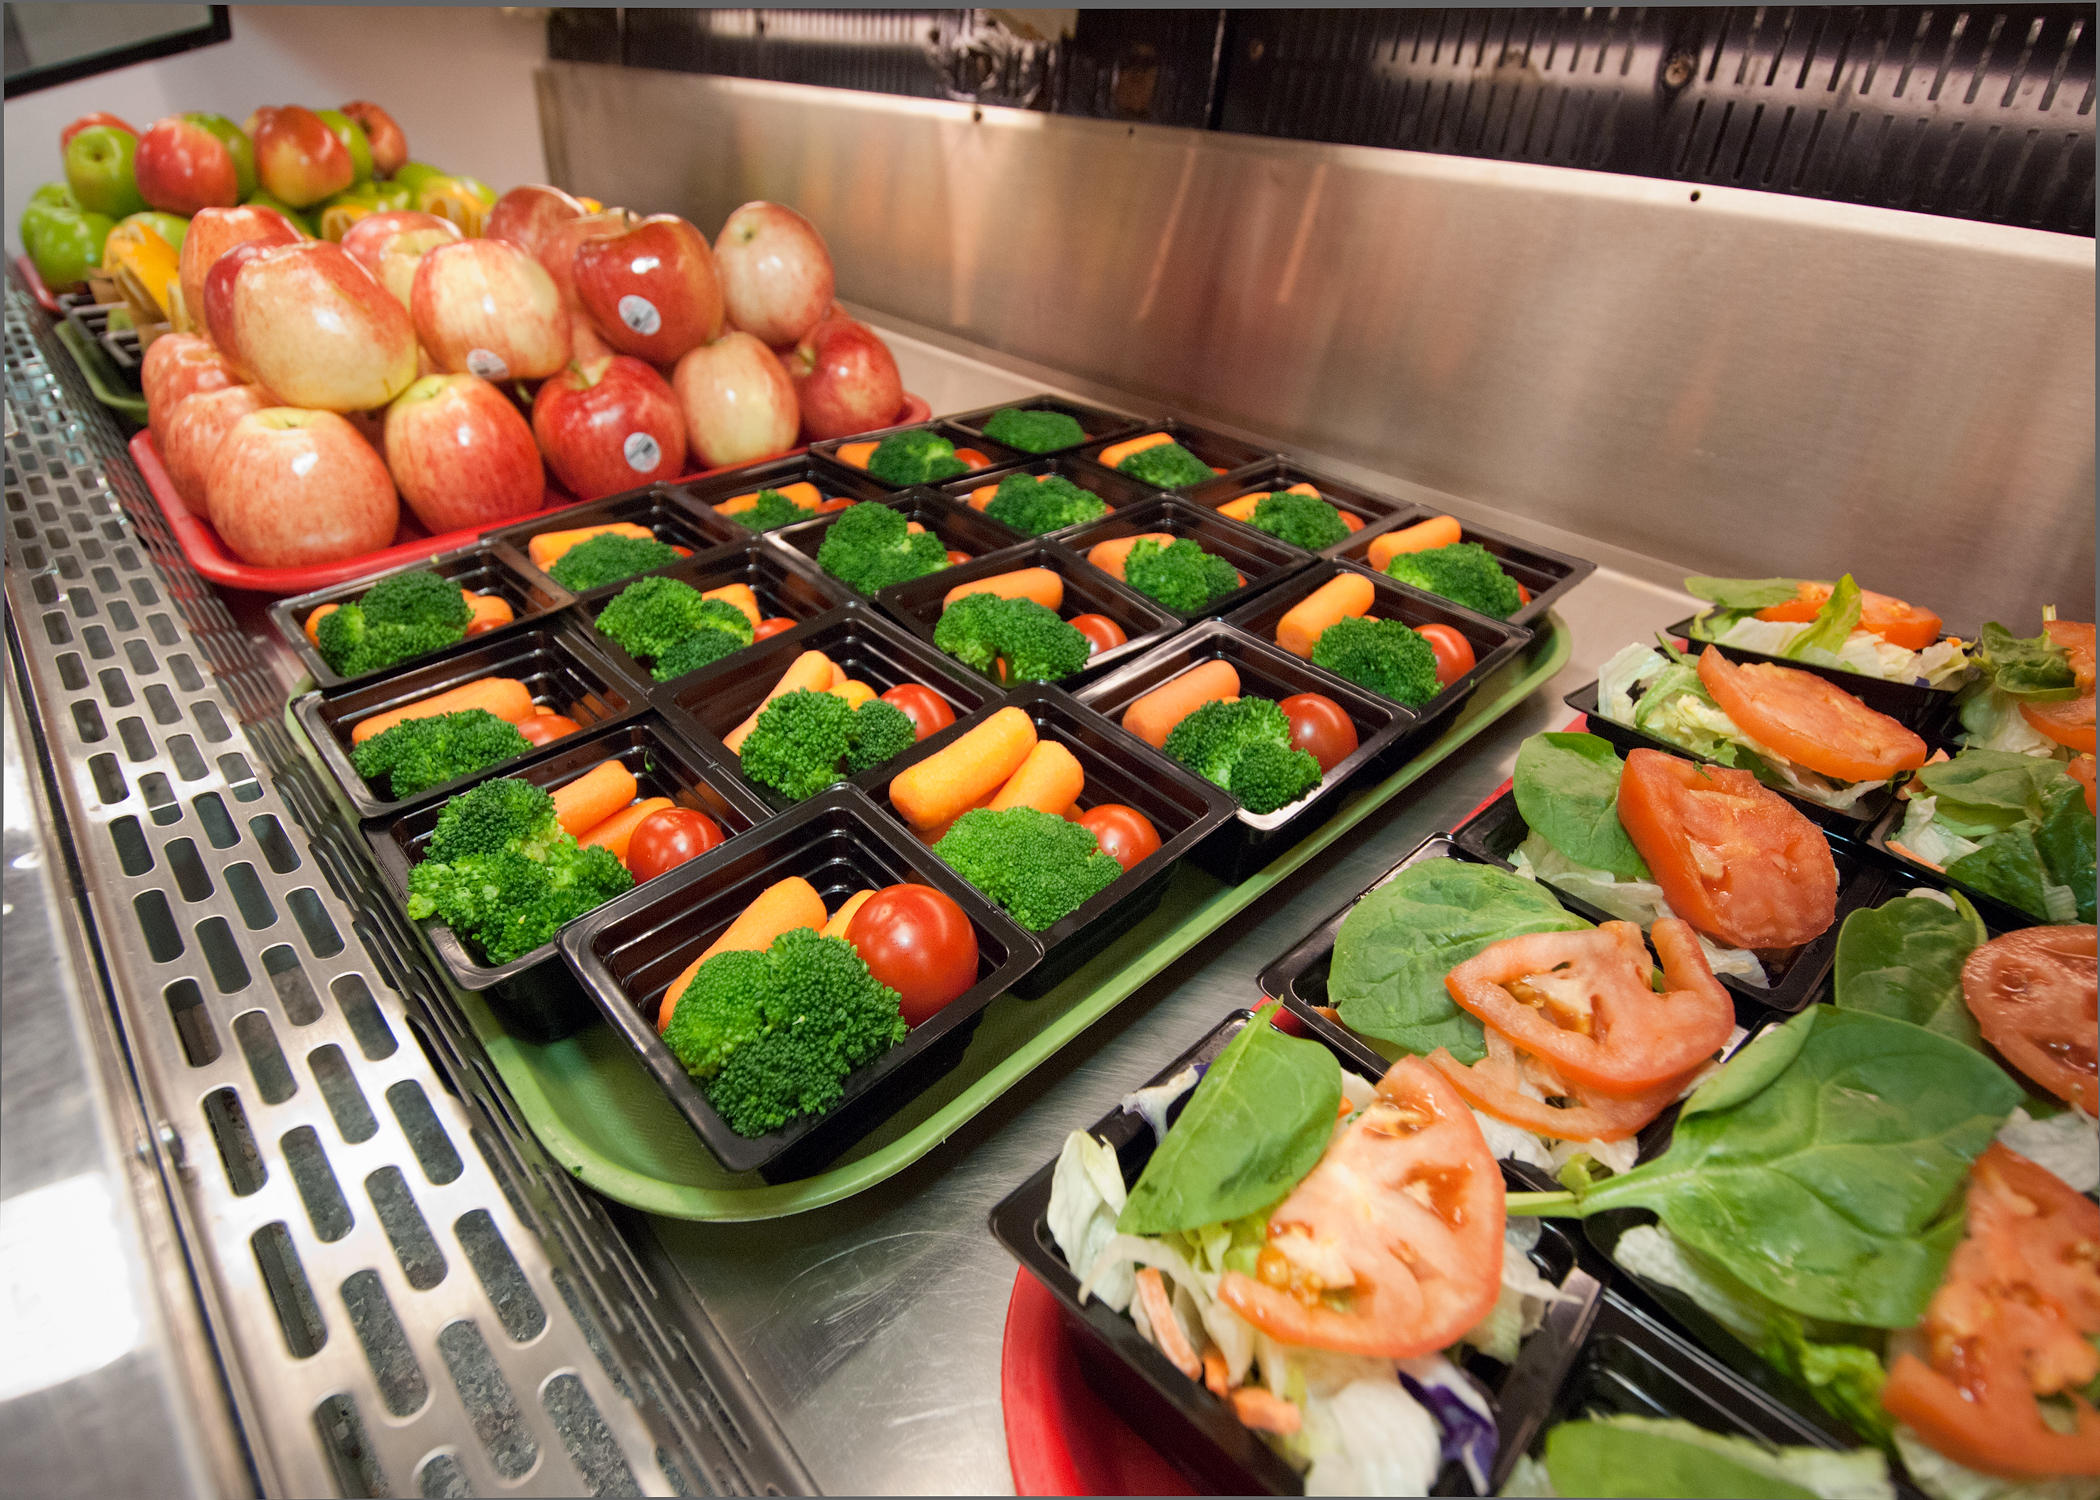 School lunch trays filled with food